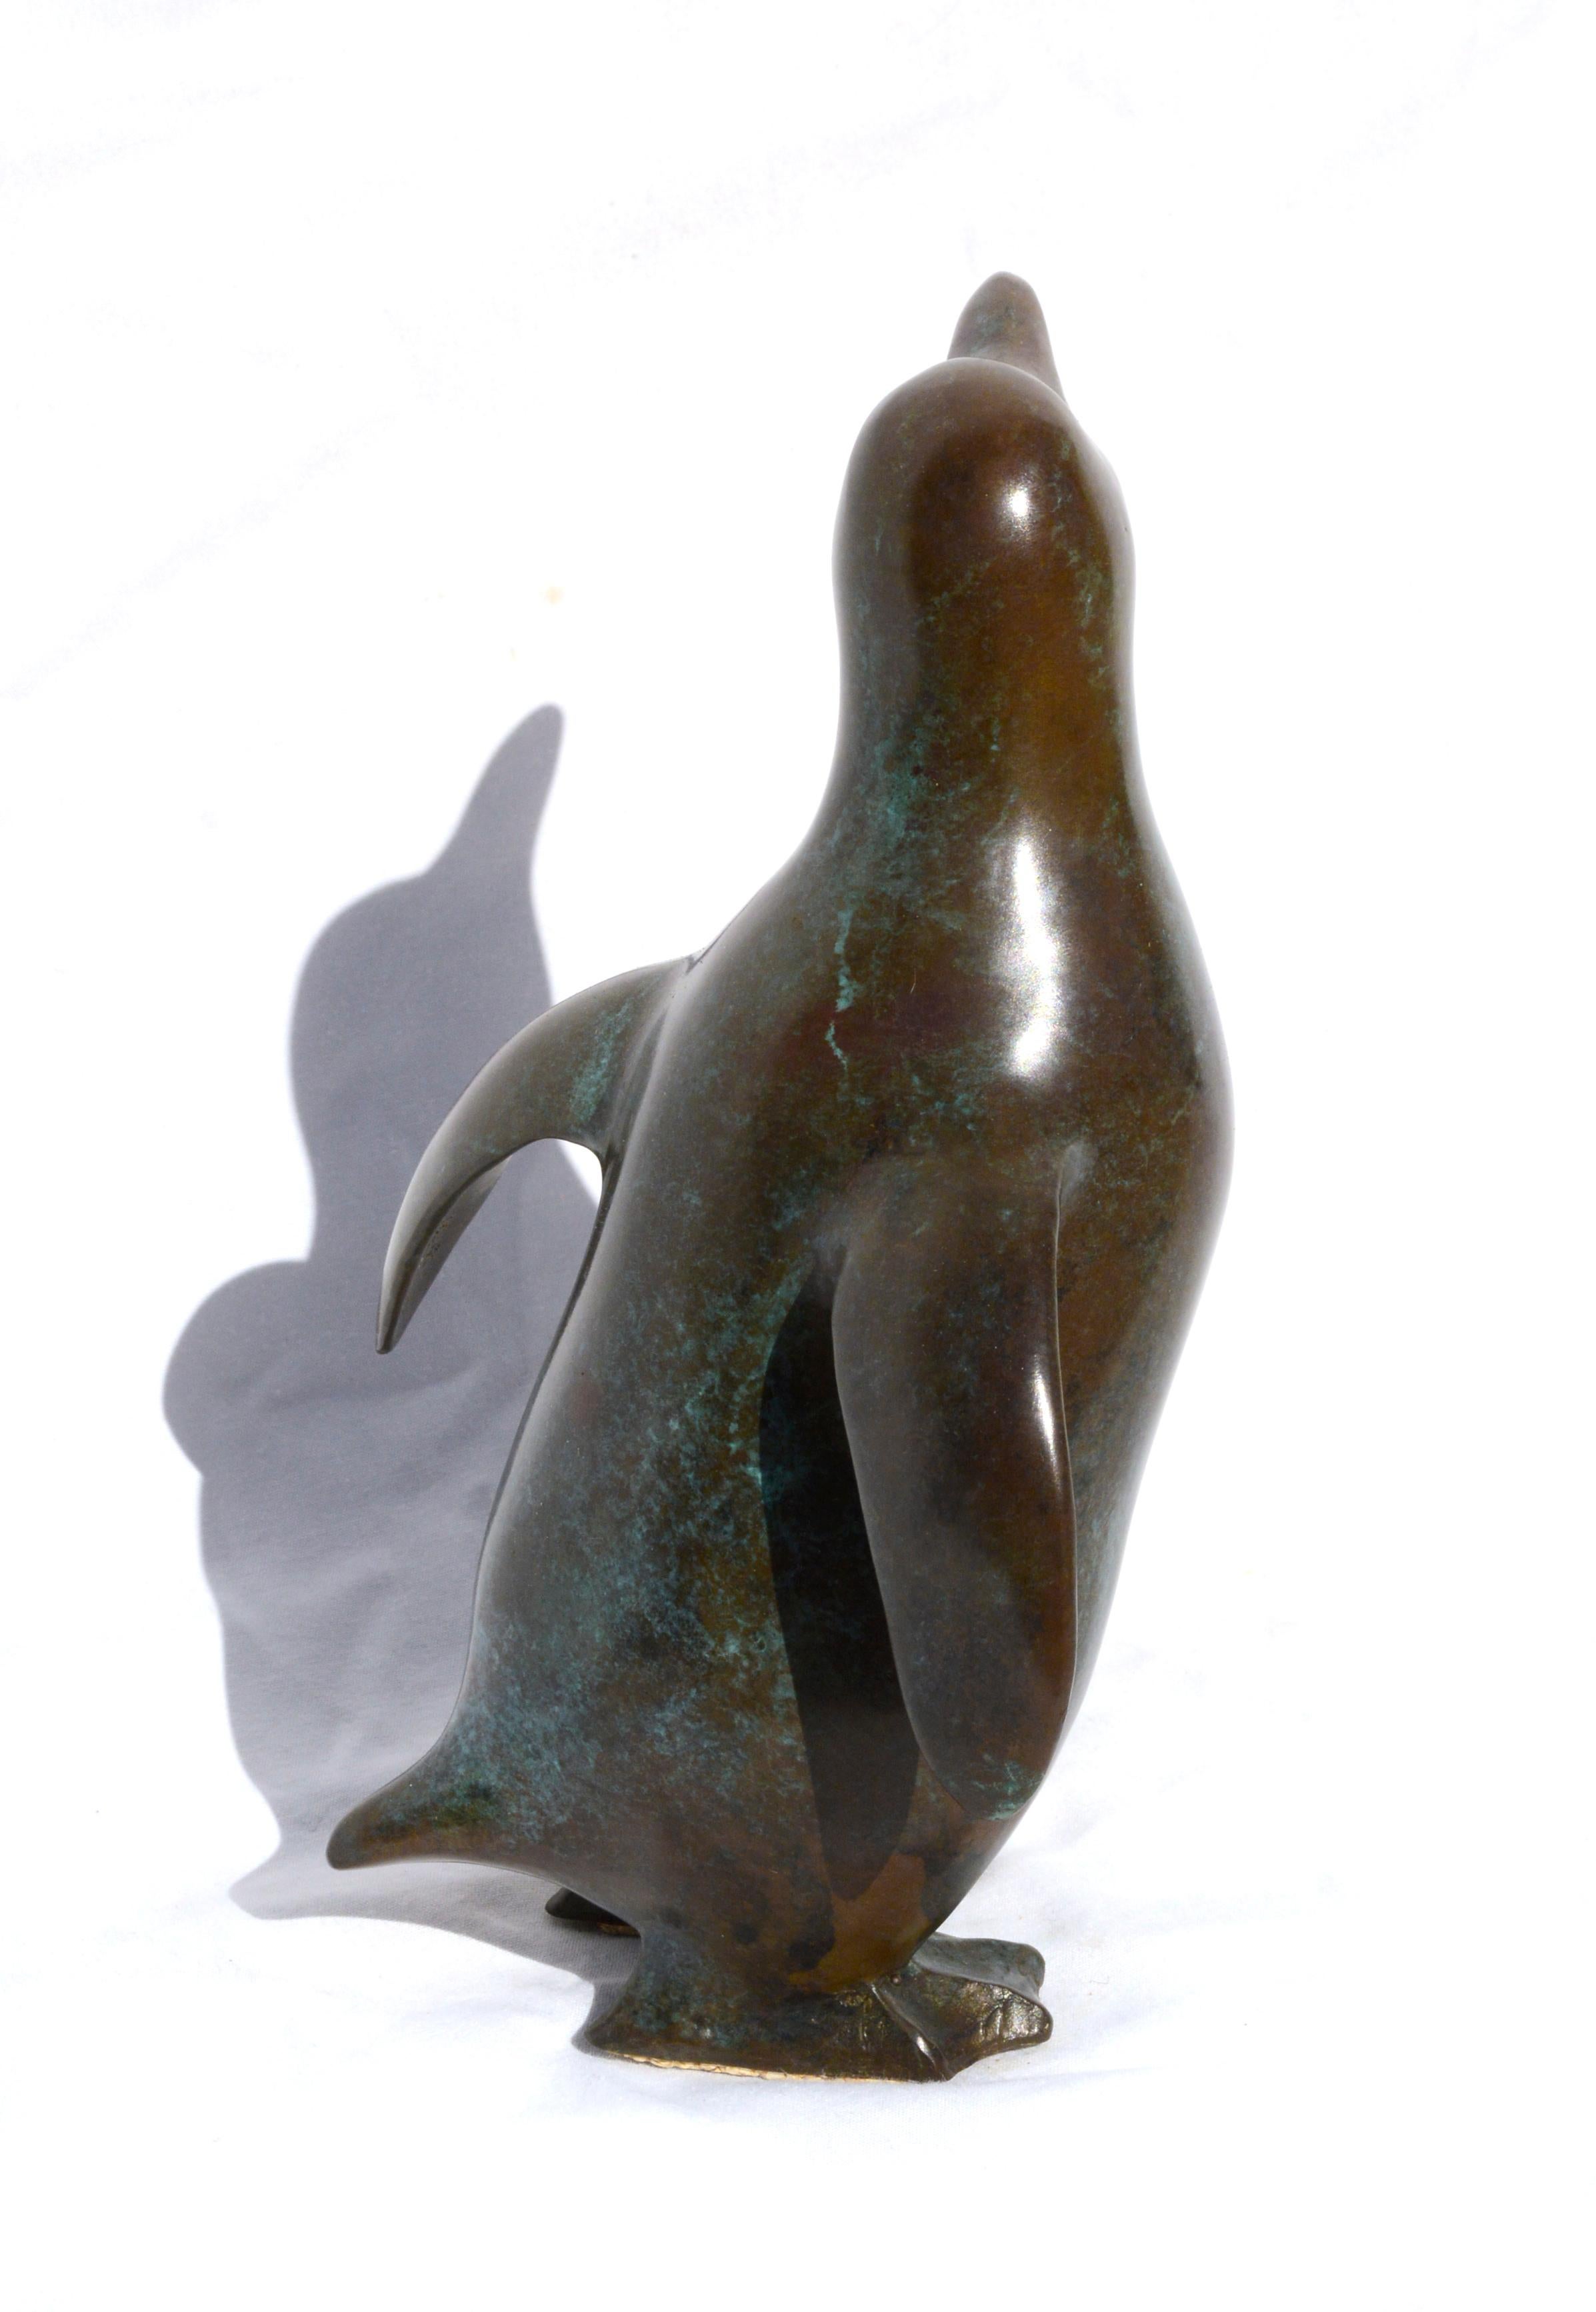 Penguin Sculpture #14 of 50 by Winston Carmean for the Cousteau Foundation Rare 1